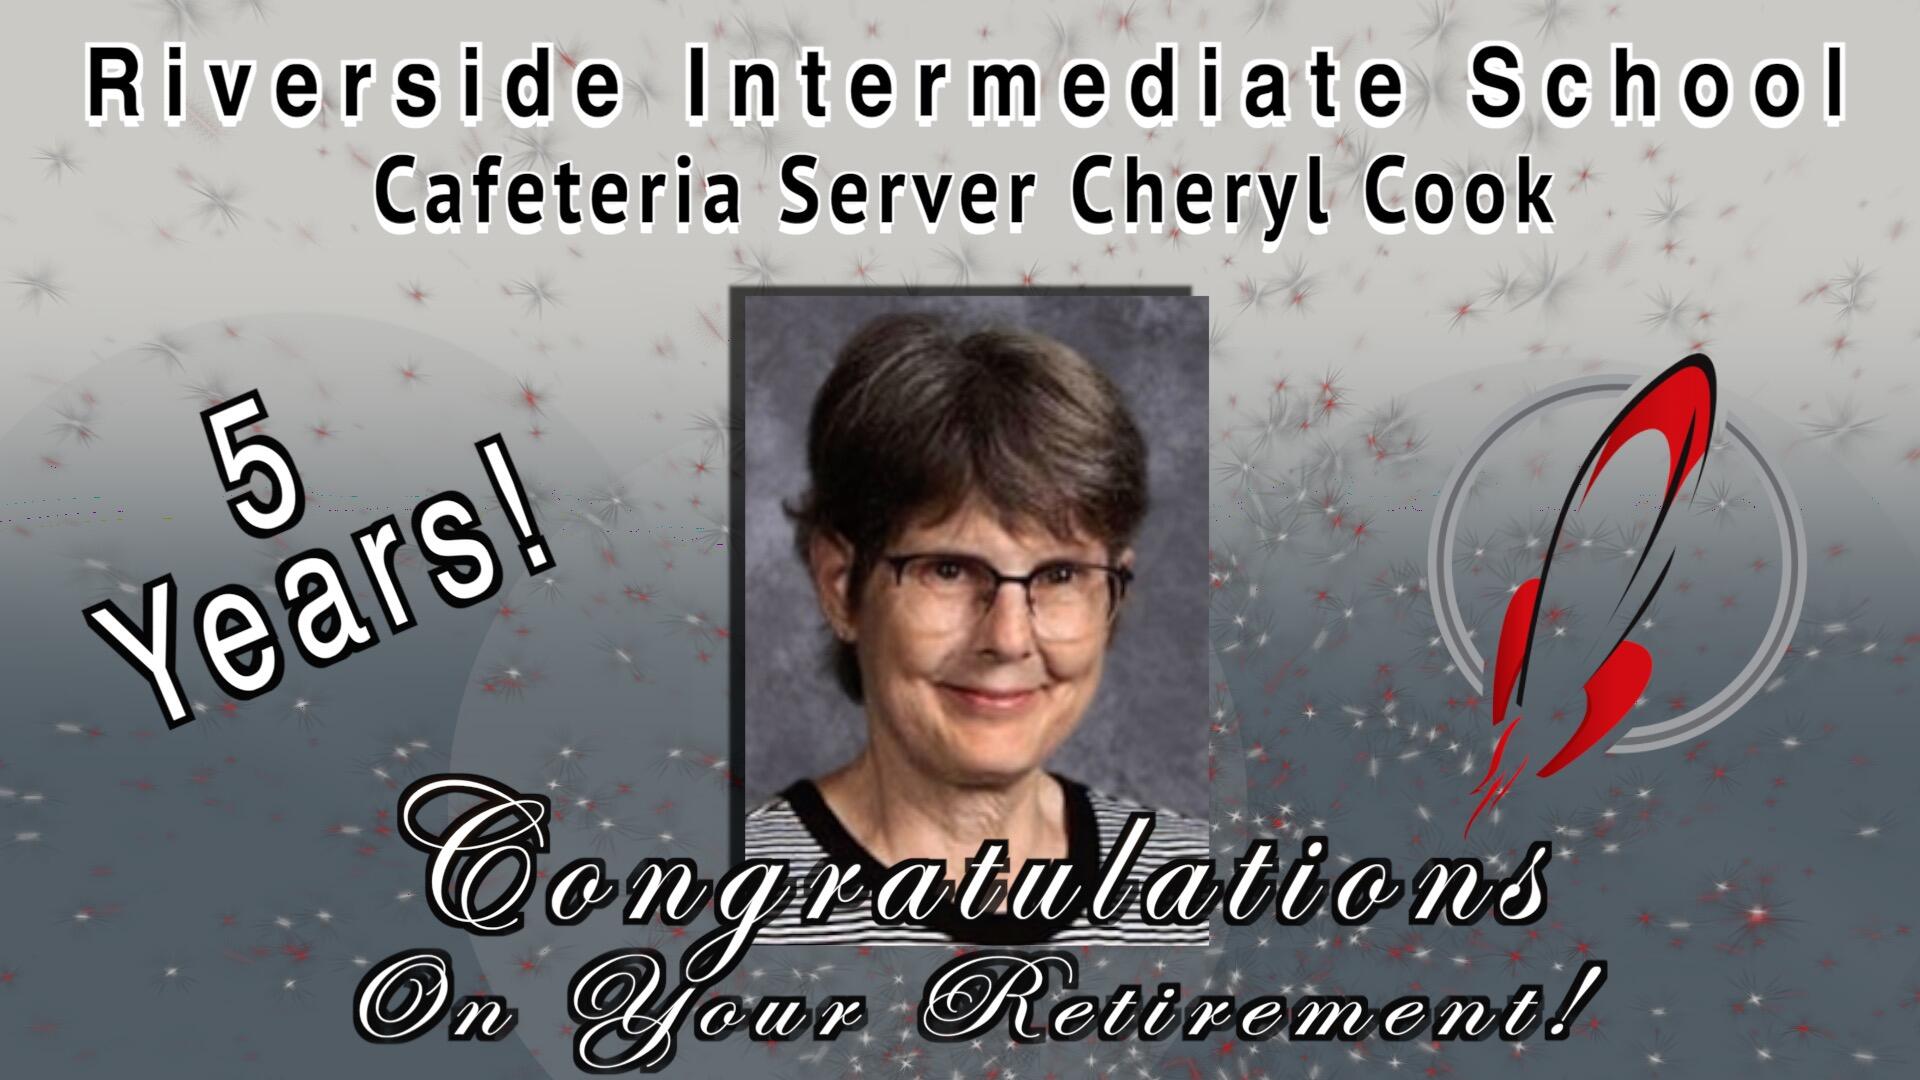 Riverside Intermediate School Cafeteria Server Cheryl Cook- 5 years! Congratulations On Your Retirement! with rocket logo